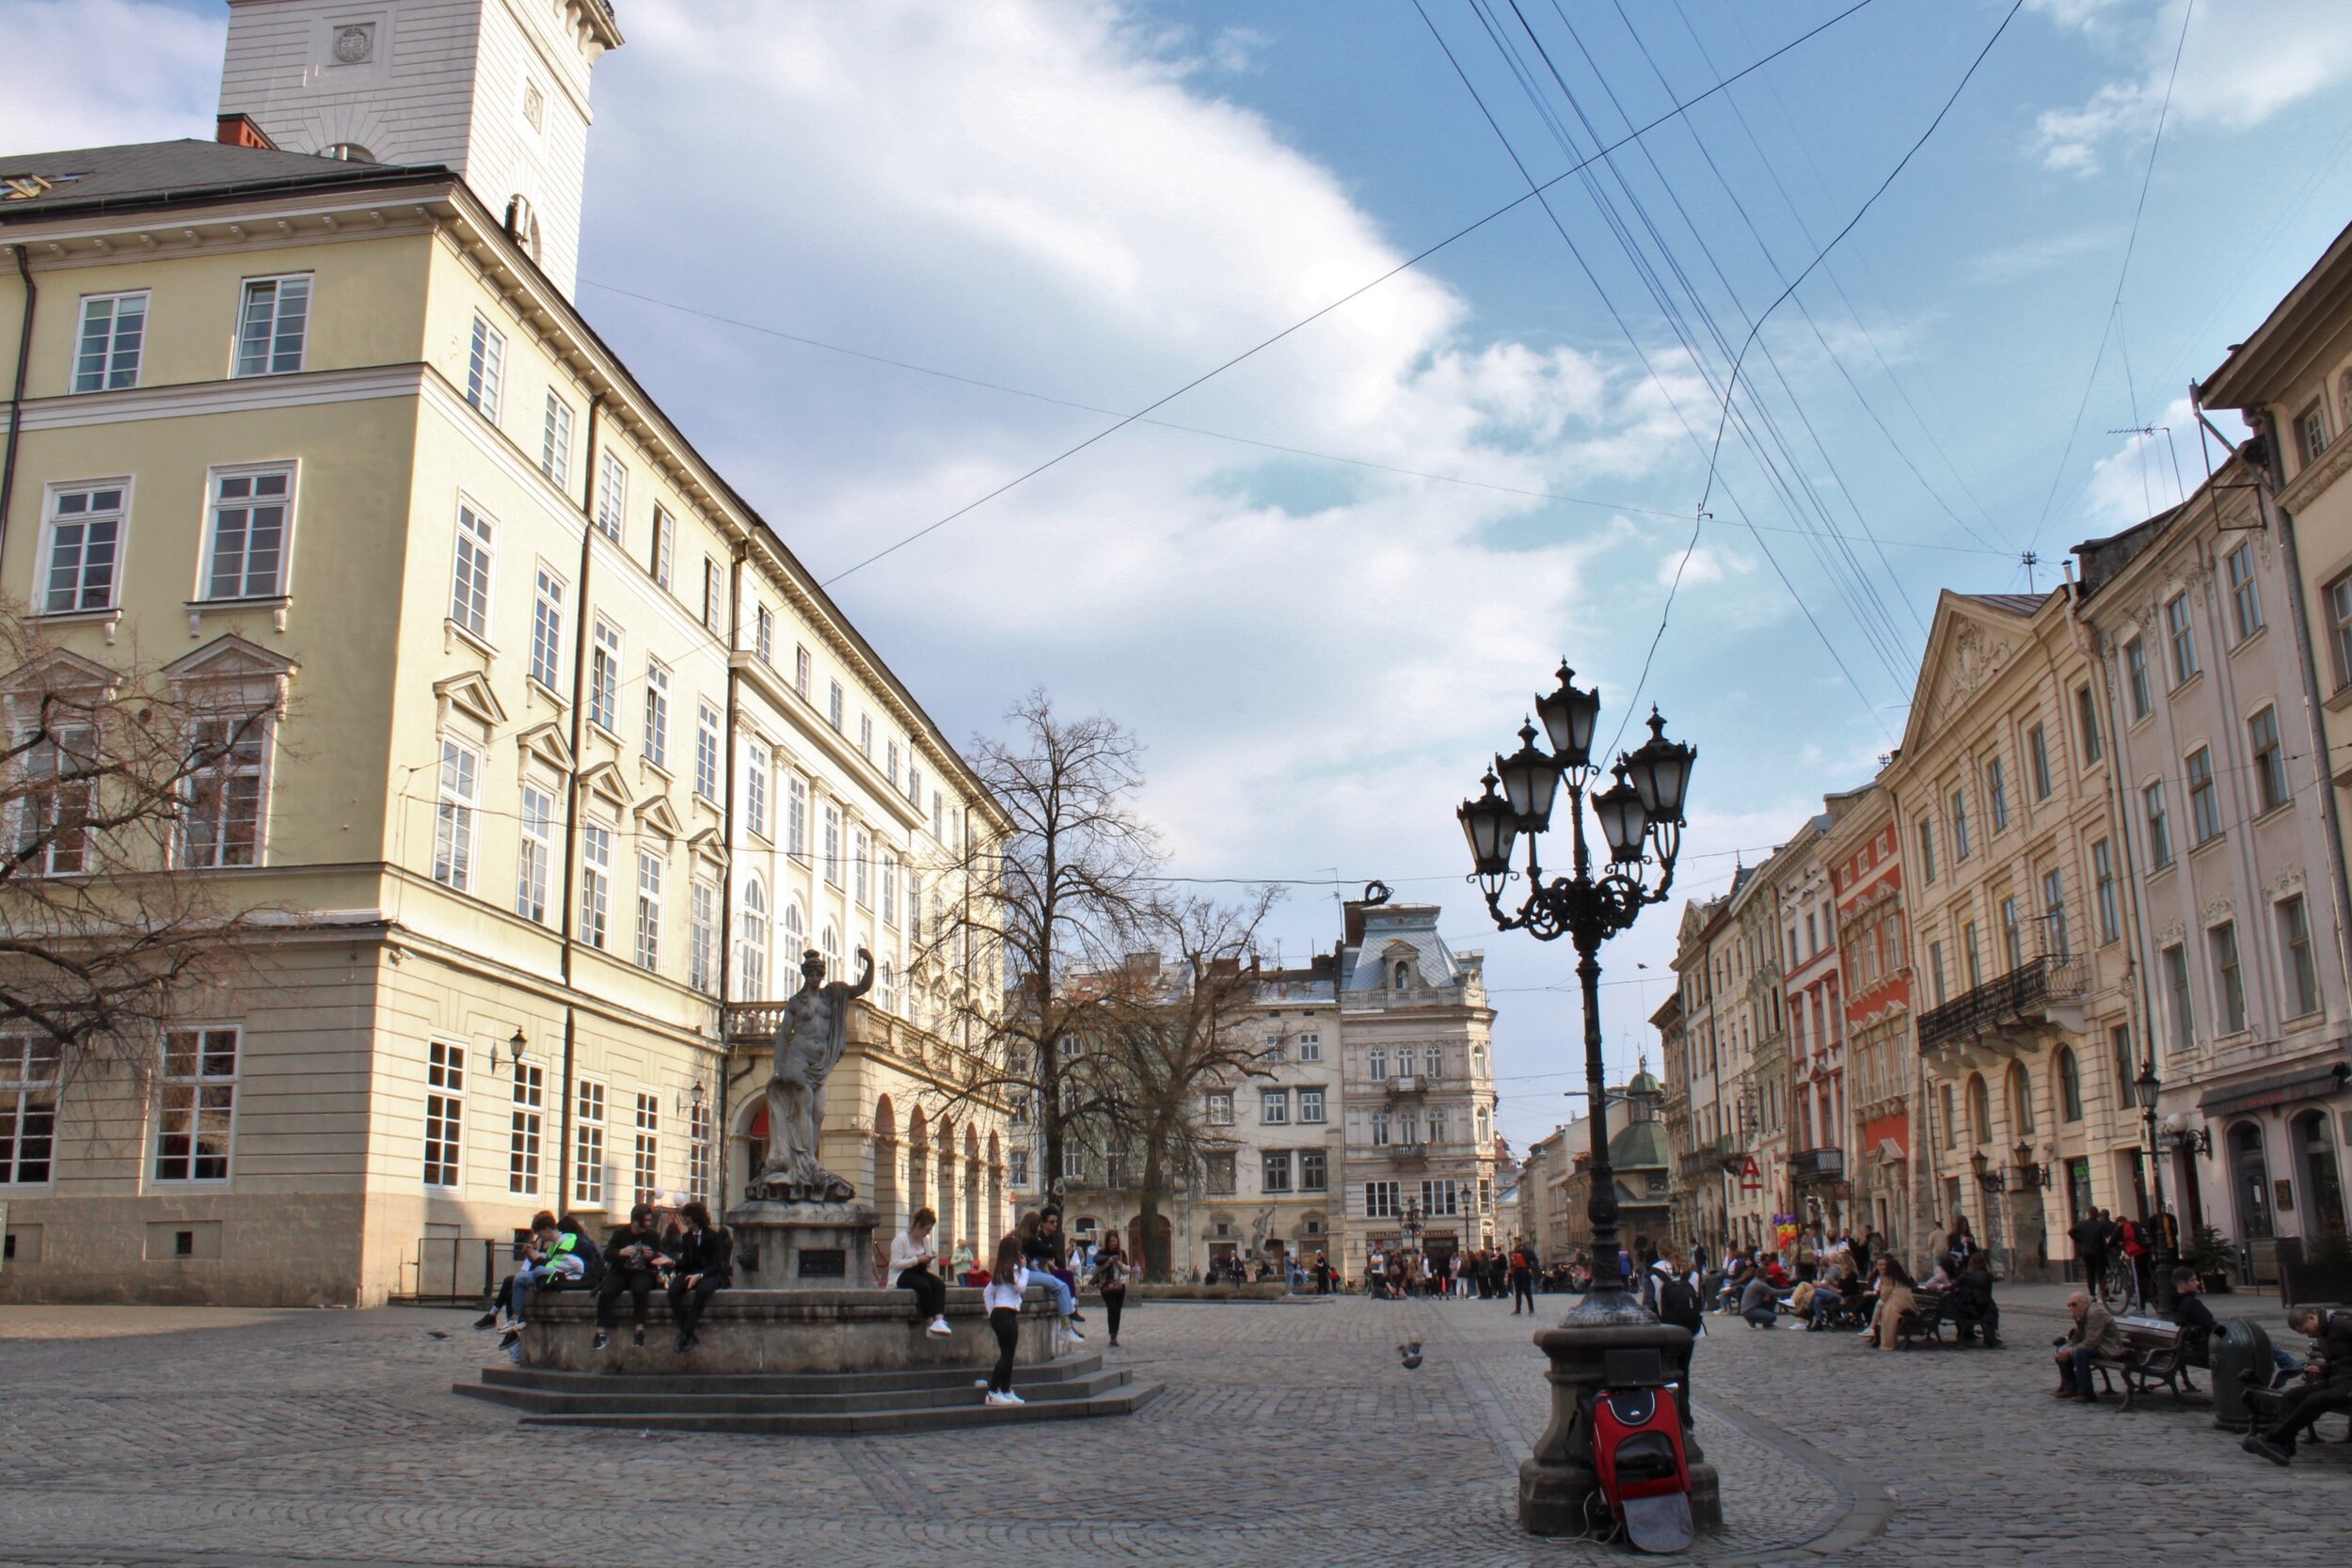 L’viv in a Day — According to World at Large